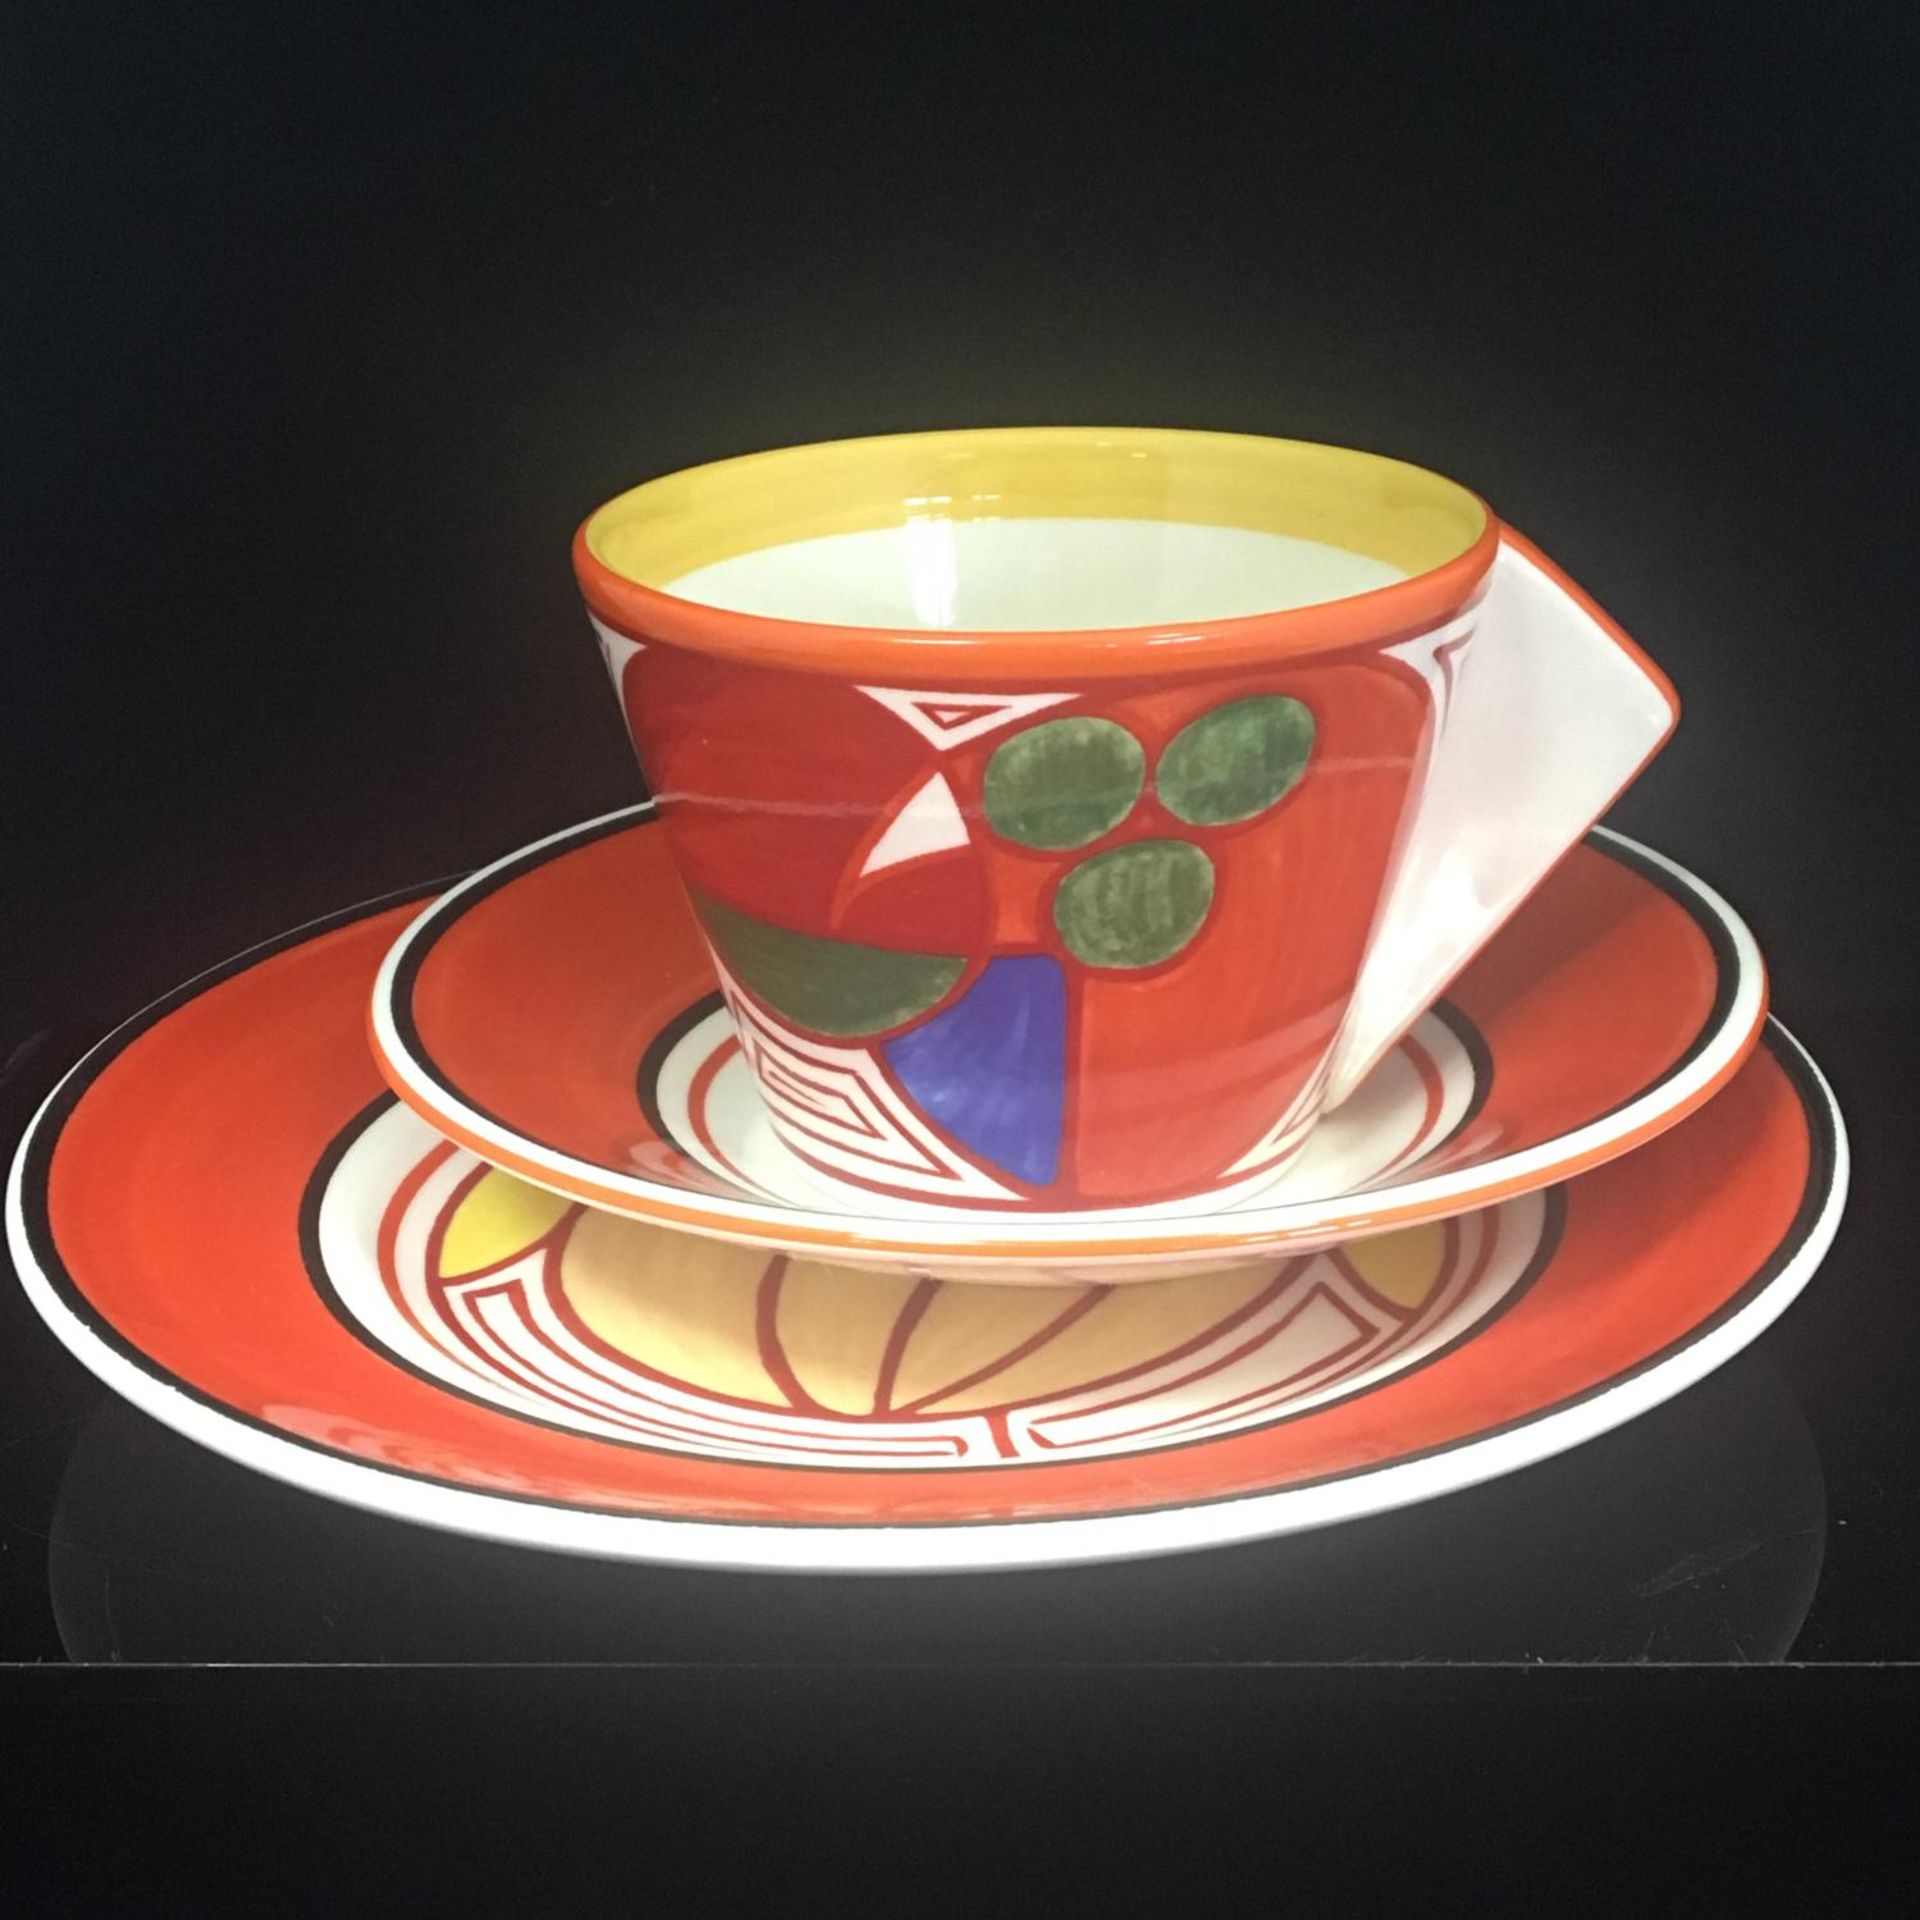 Bizarre by Clarice Cliff for Wedgwod. A trio consisting of teacup, saucer and side plate.